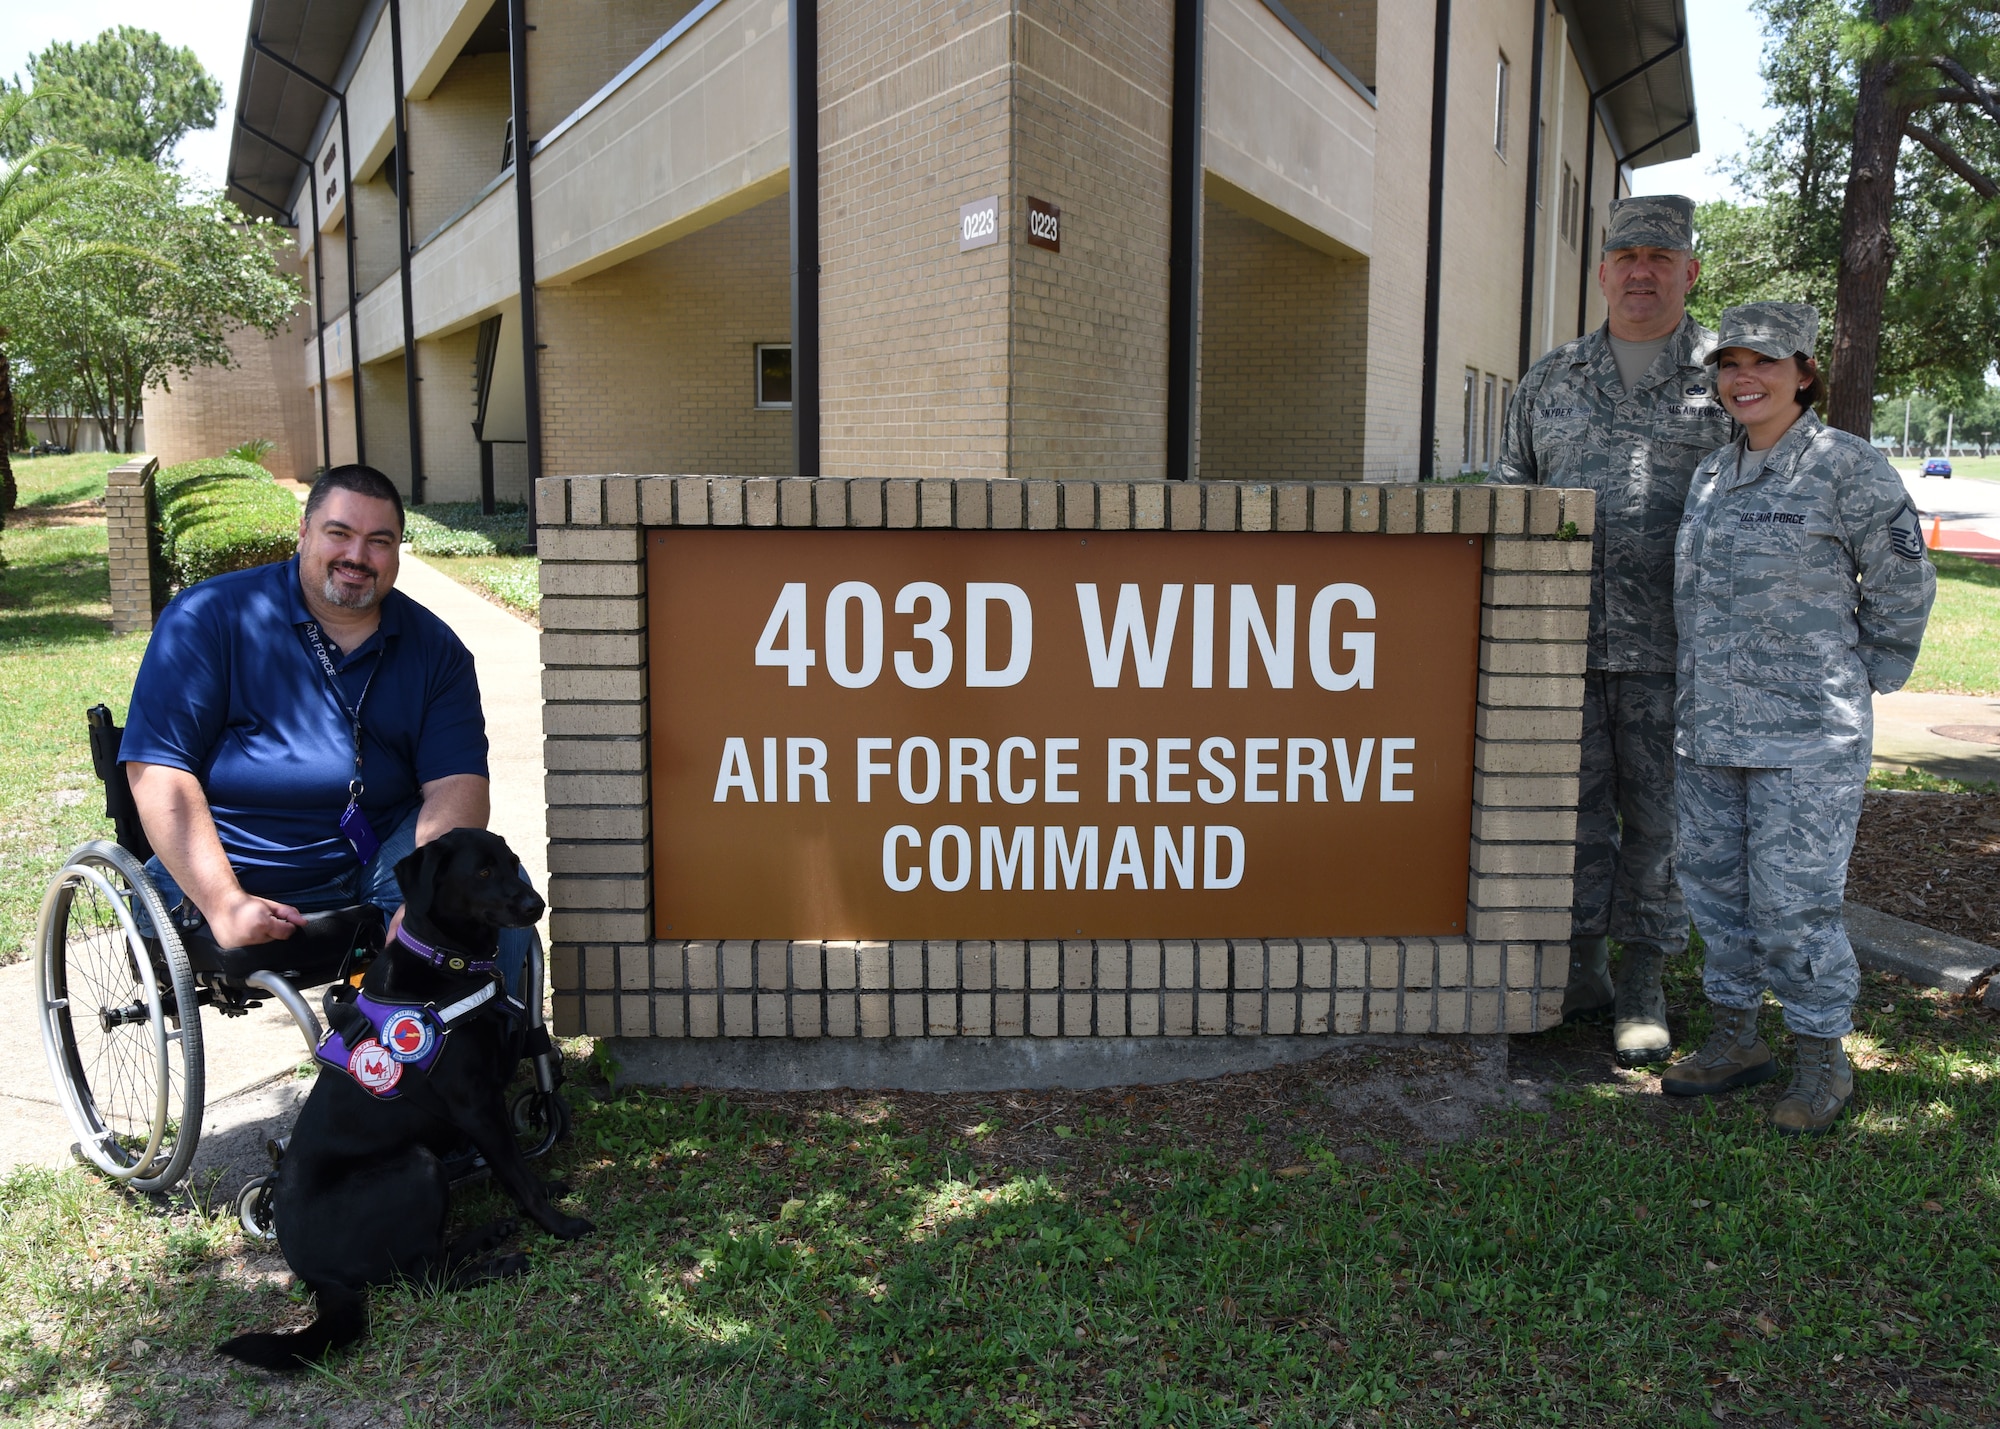 Kevin Waterhouse, Chief Master Sgt. Monte Snyder, and Master Sgt. Chastity Roush are master resiliency trainers for the 403rd Wing, an Air Force Reserve unit at Keesler Air Force Base, Mississippi. They assist with teaching first term Airmen in nine areas that enhance resilience, one of the core tenets of the Air Force’s Comprehensive Airman Fitness, which encompasses creating Airmen with solid mental, physical, social and spiritual well-being. (U.S. Air Force photo/Lt. Col. Marnee A.C. Losurdo)